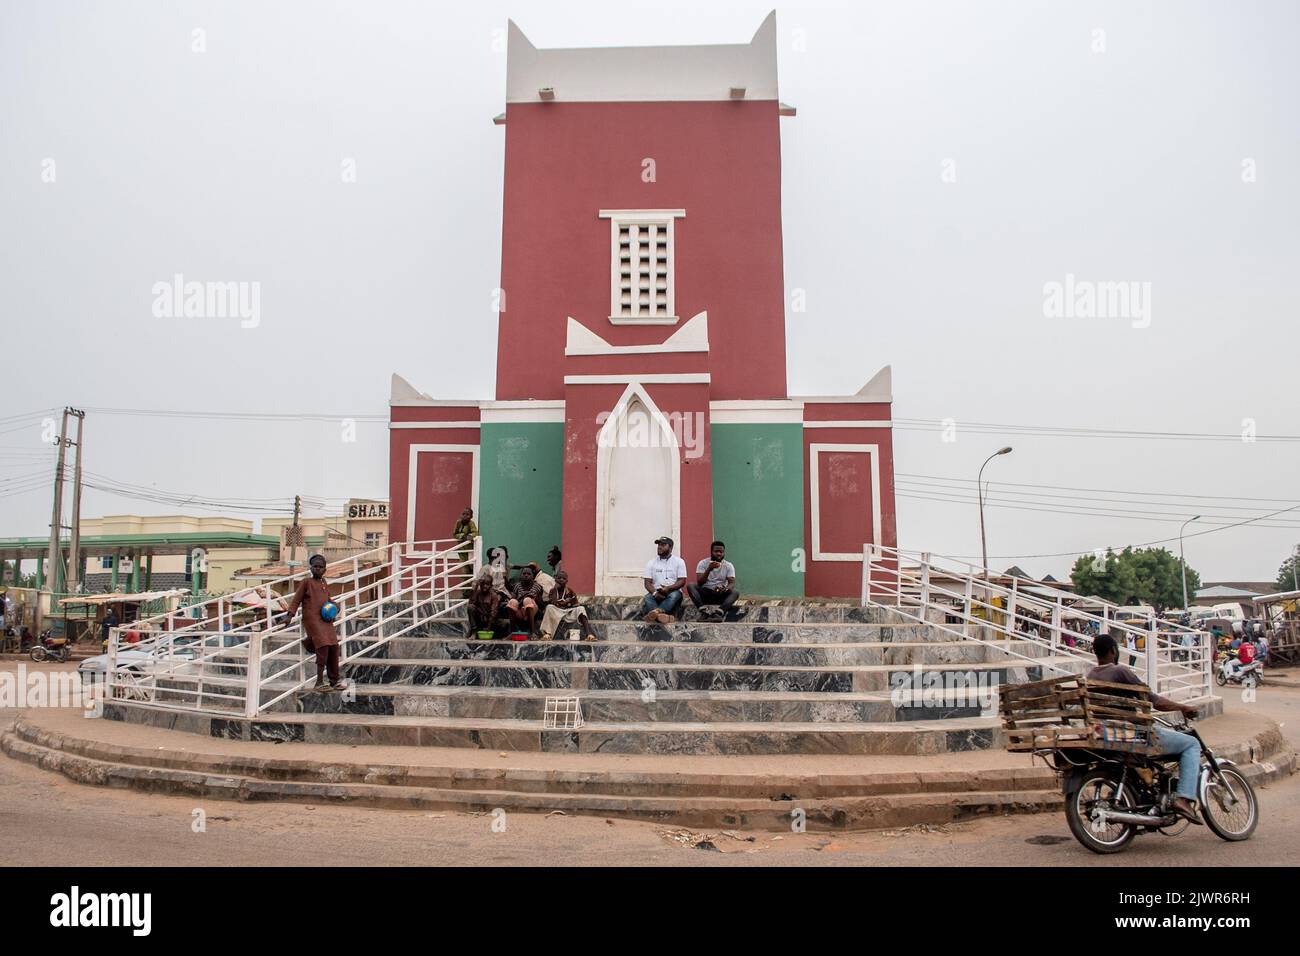 A market area in Kastina, NIGERIA, on July 27, 2022. Everyday life in Northern Region, Nigeria Stock Photo